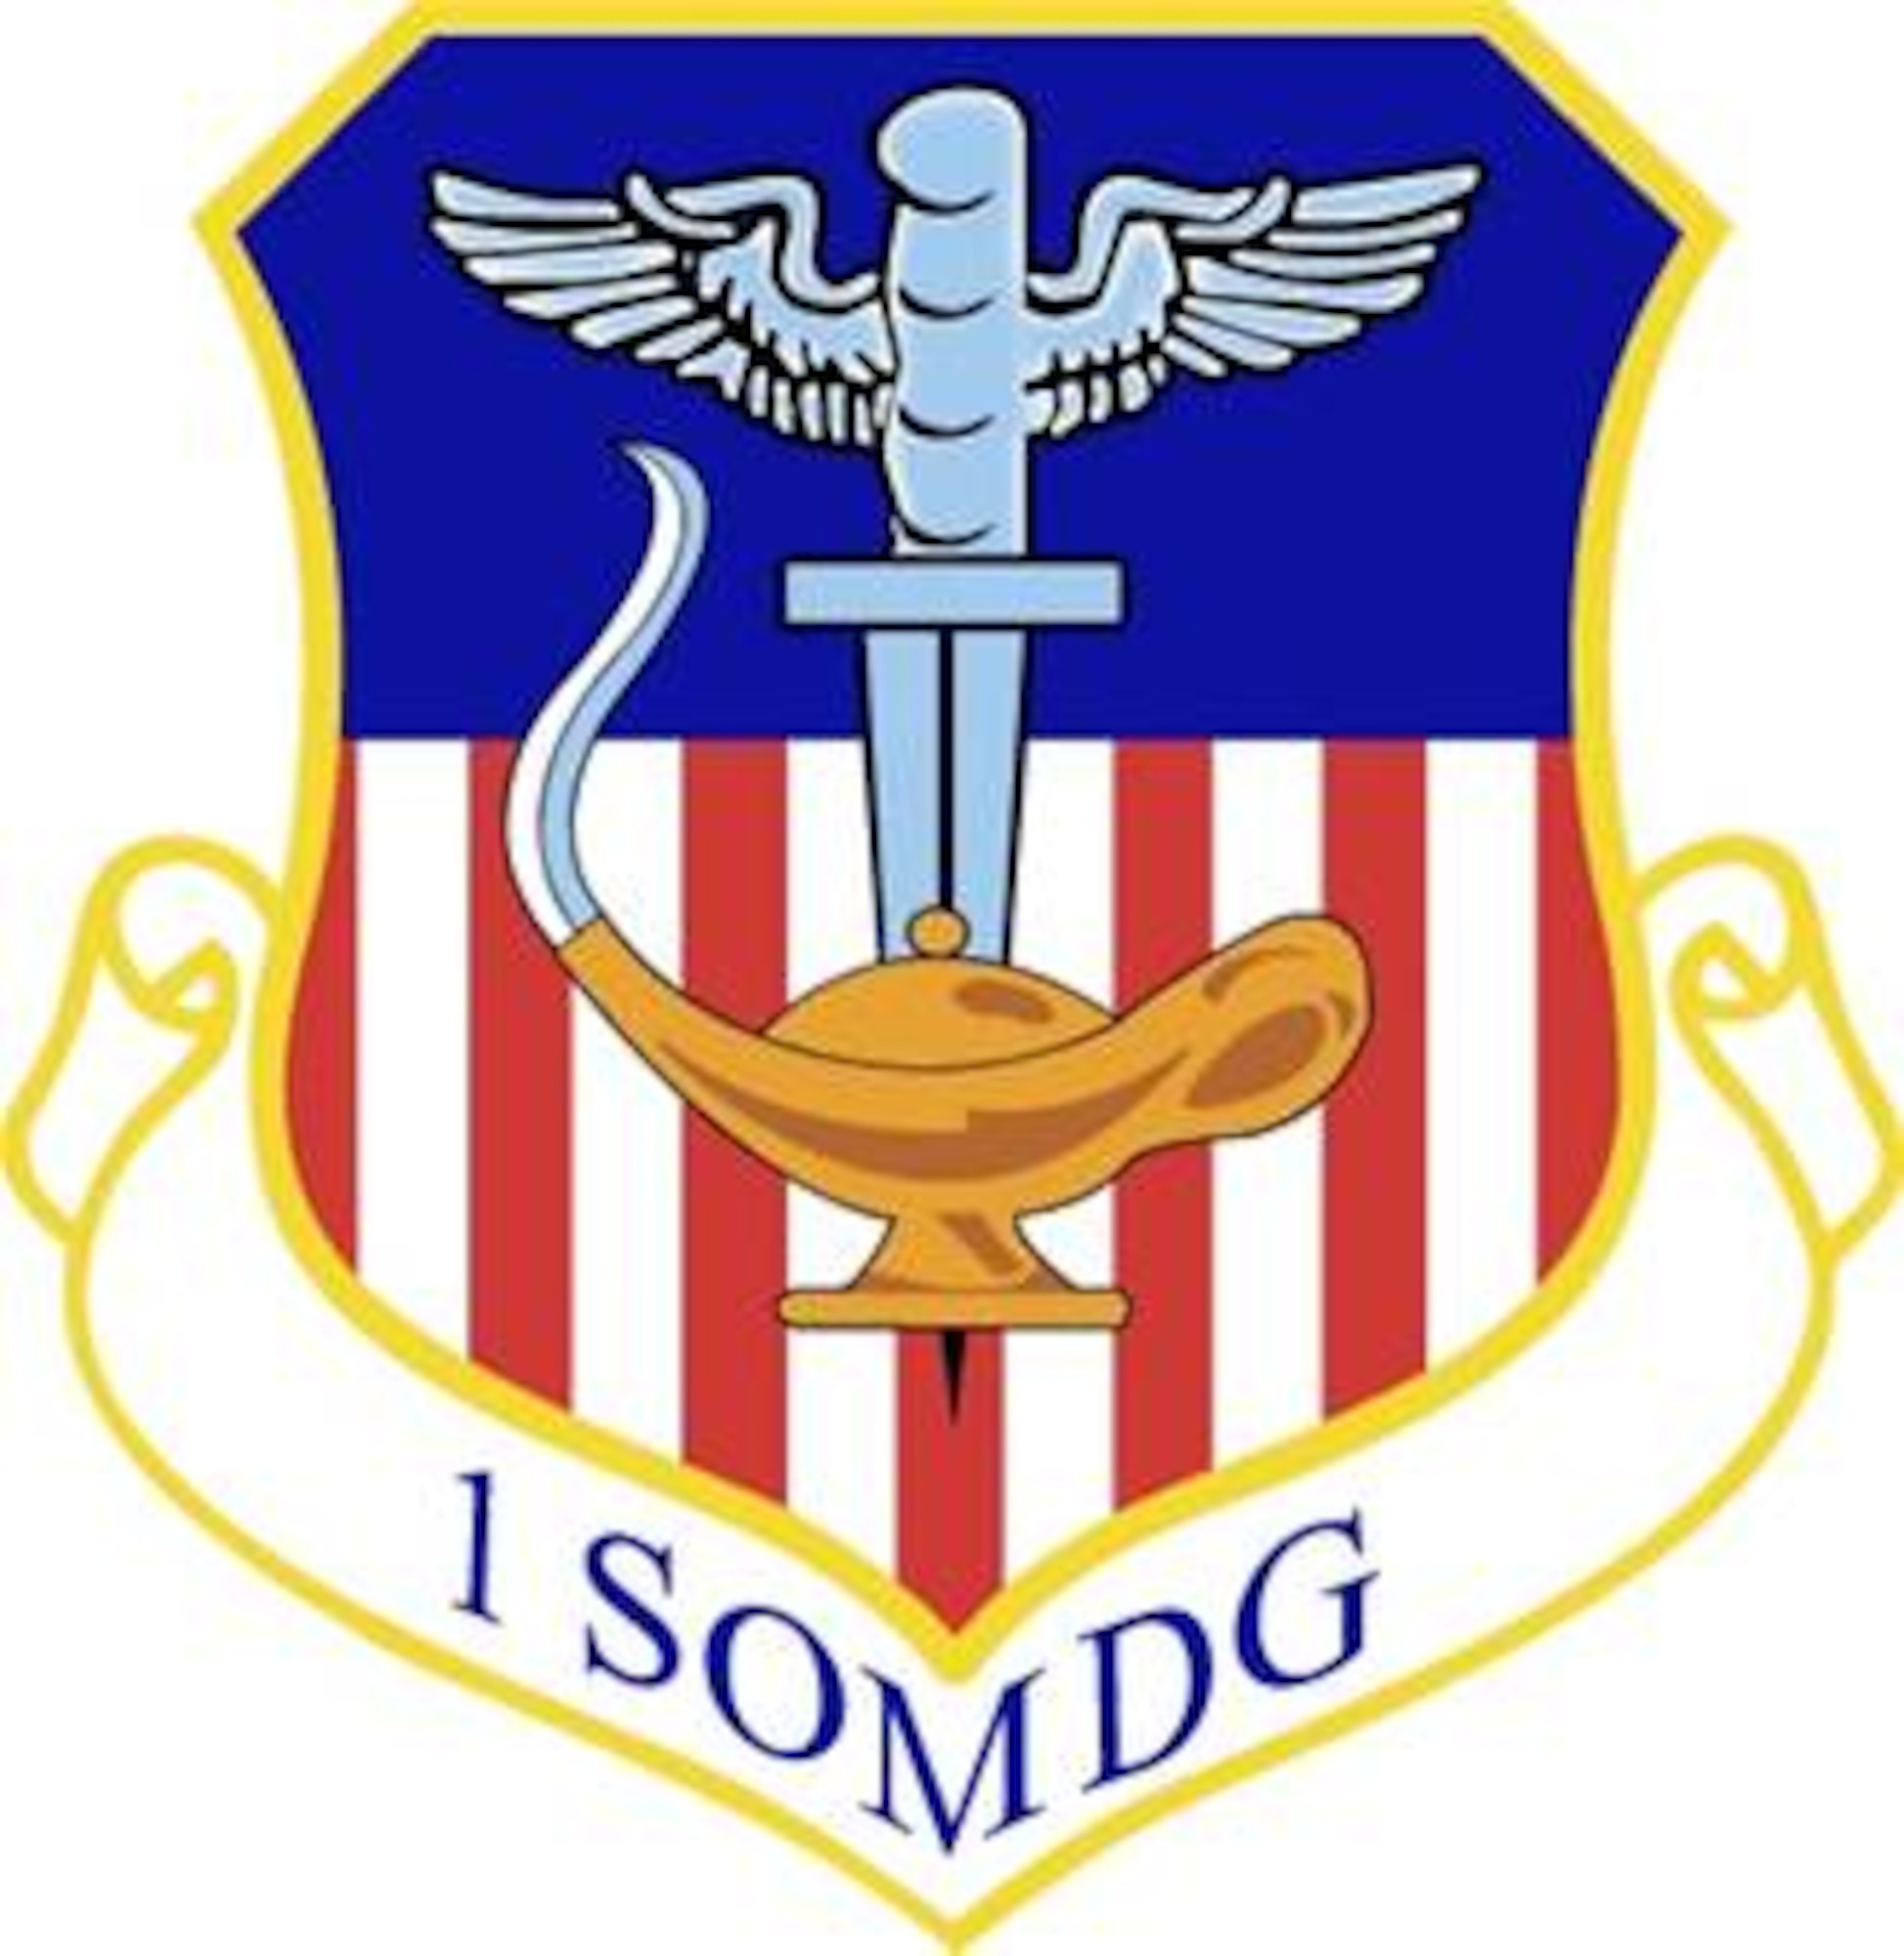 1st Special Operations Medical Group shield